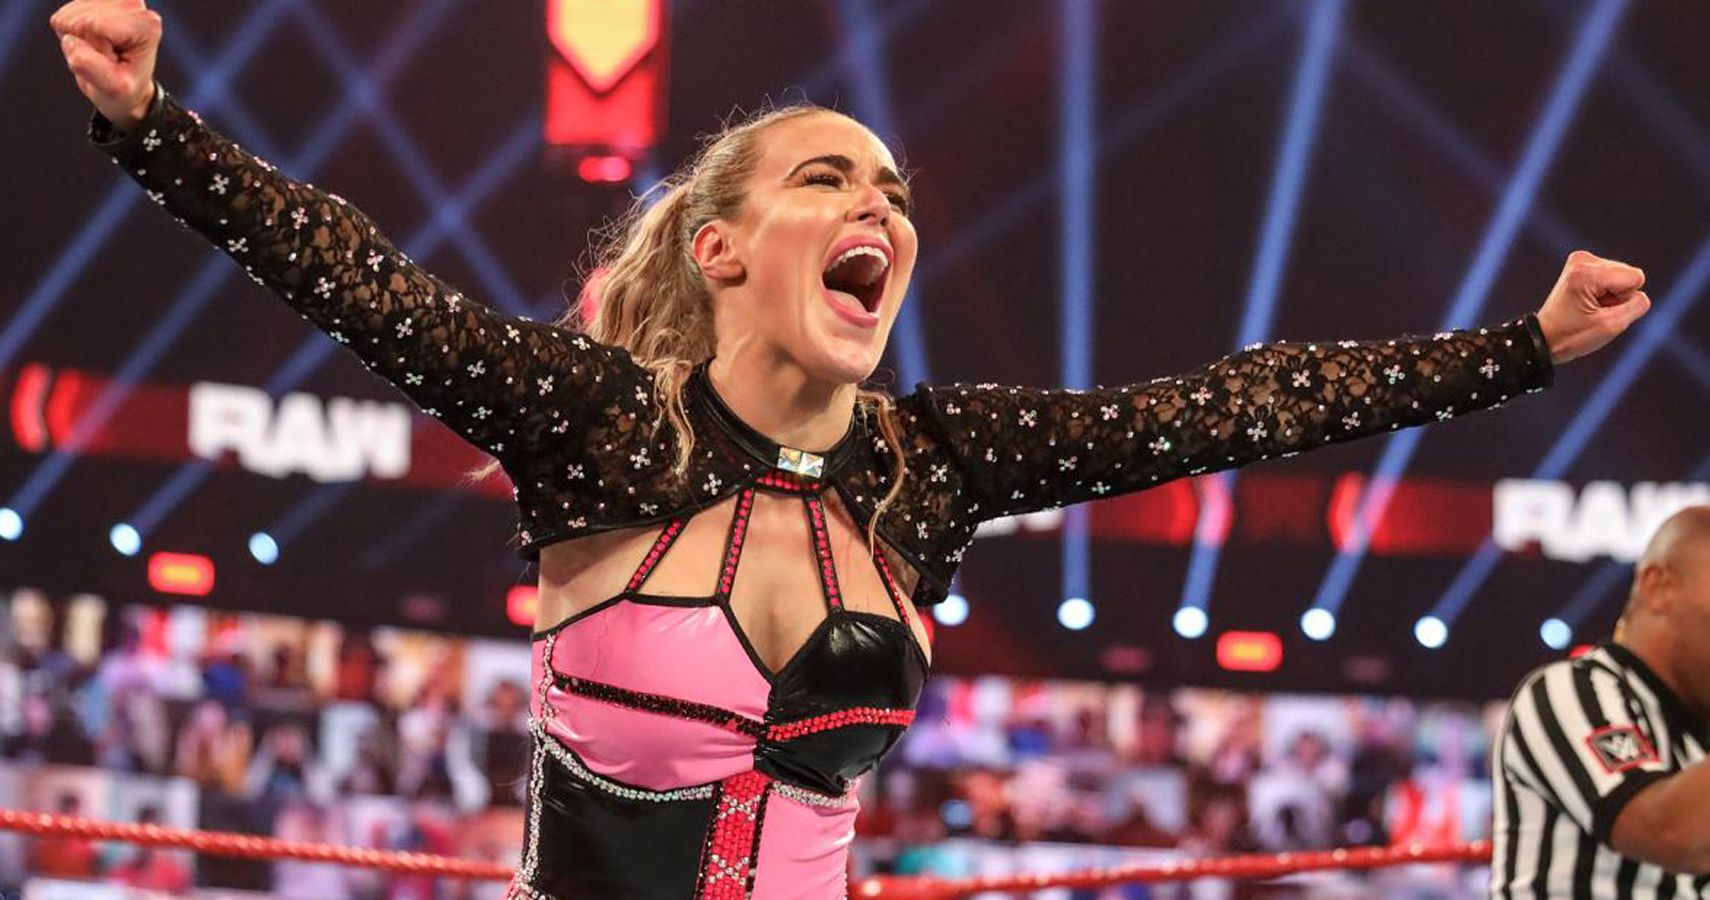 Lana Seemingly Shares Her Plan To Be Taken More Seriously In WWE